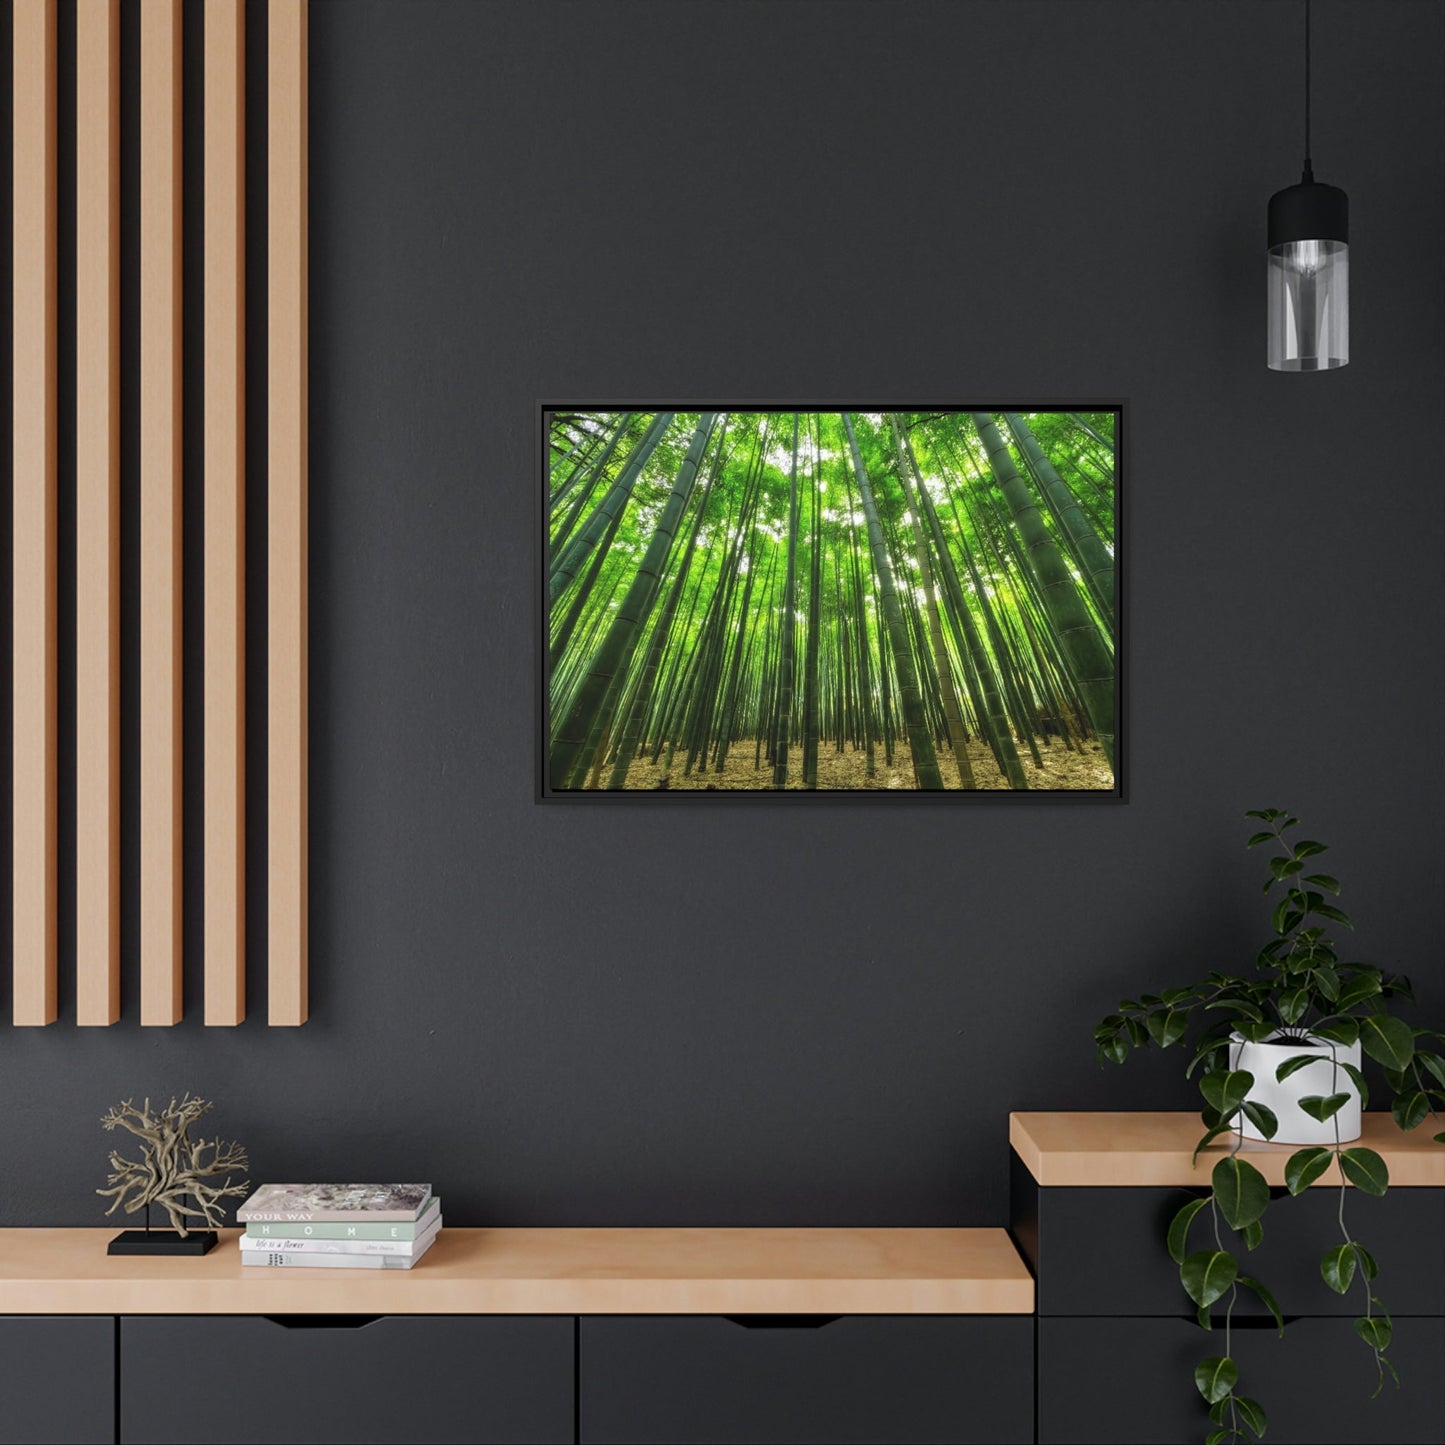 Enchanted Forest: Framed Canvas Wall Art of Trees